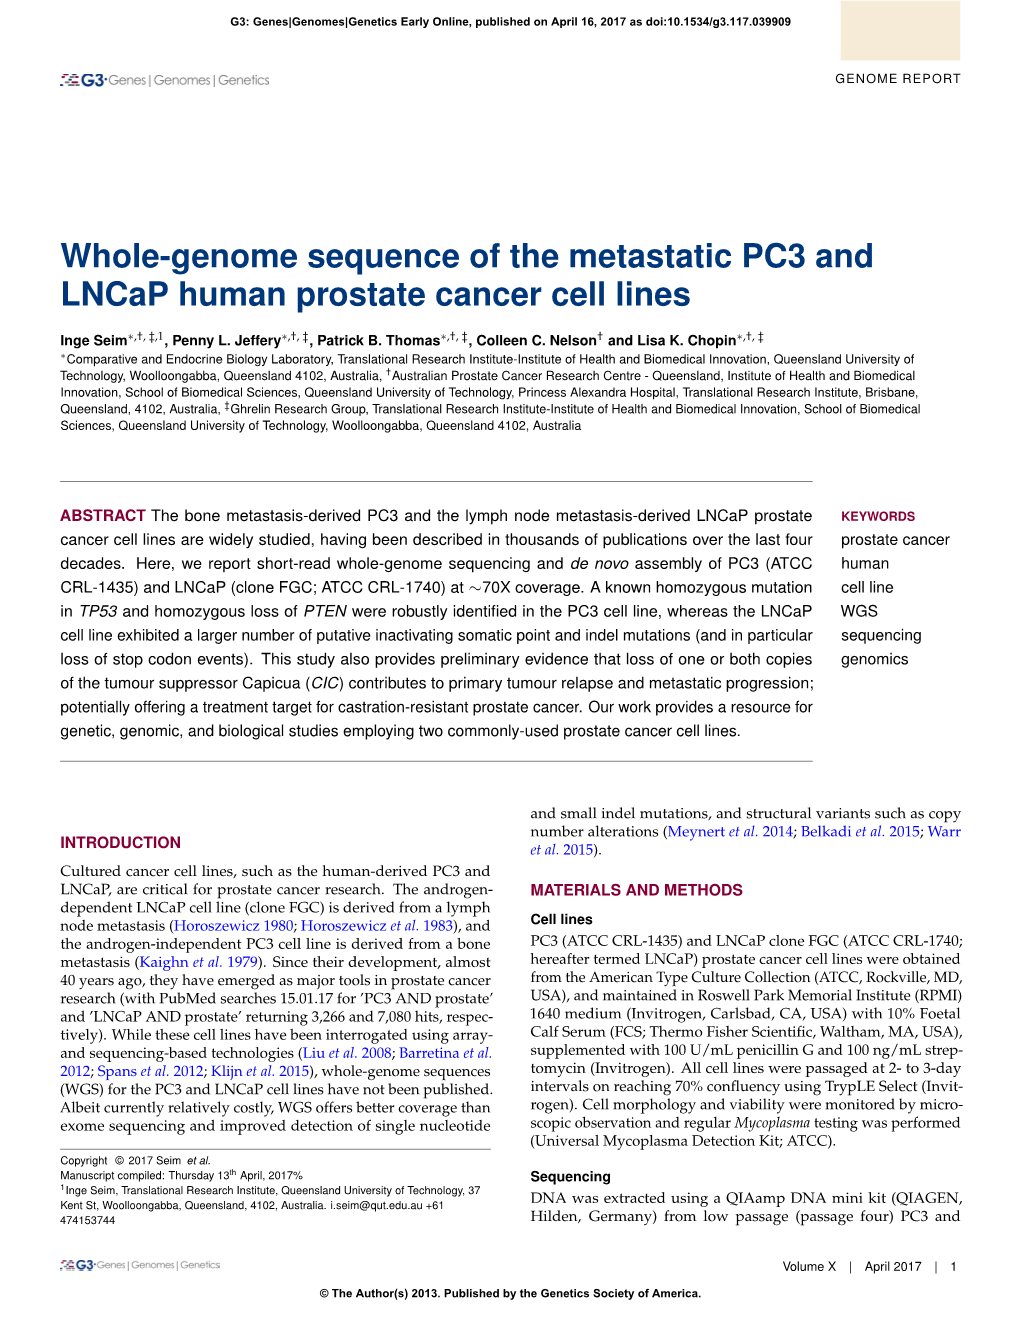 Whole-Genome Sequence of the Metastatic PC3 and Lncap Human Prostate Cancer Cell Lines